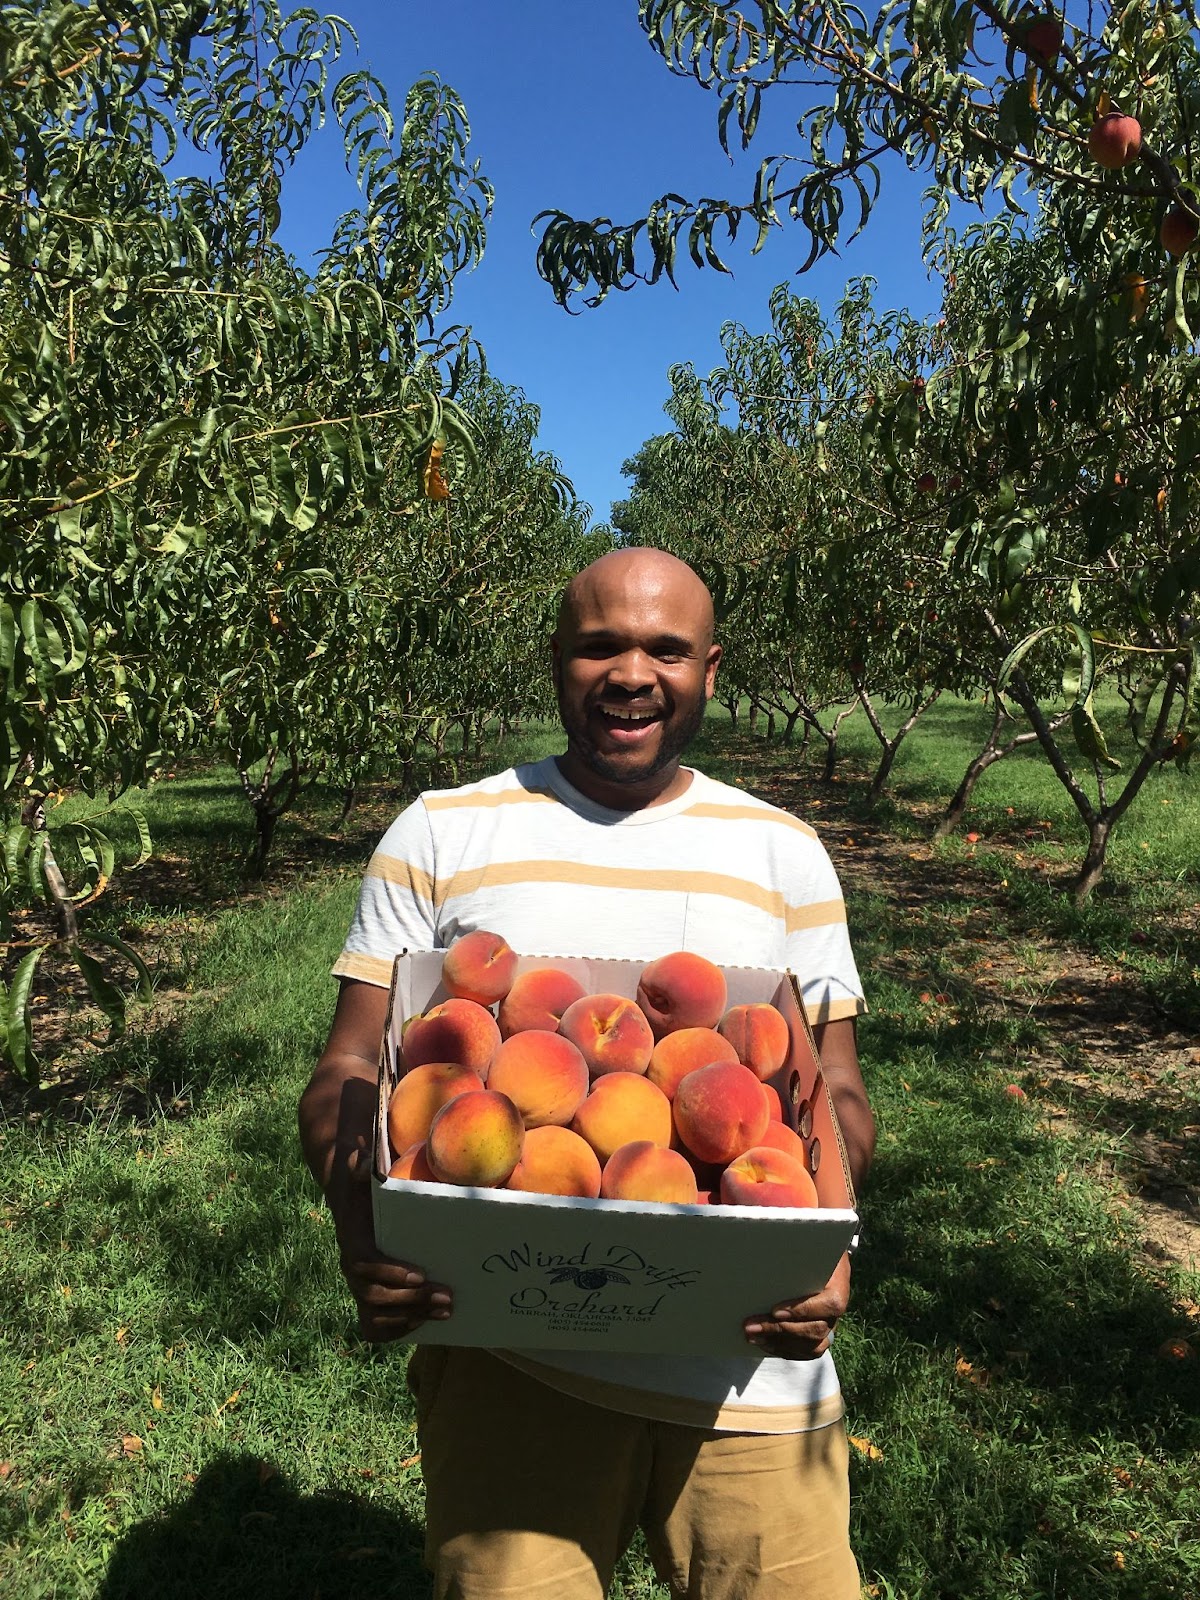 John posing for a photo while holding a box full of ripe peaches.